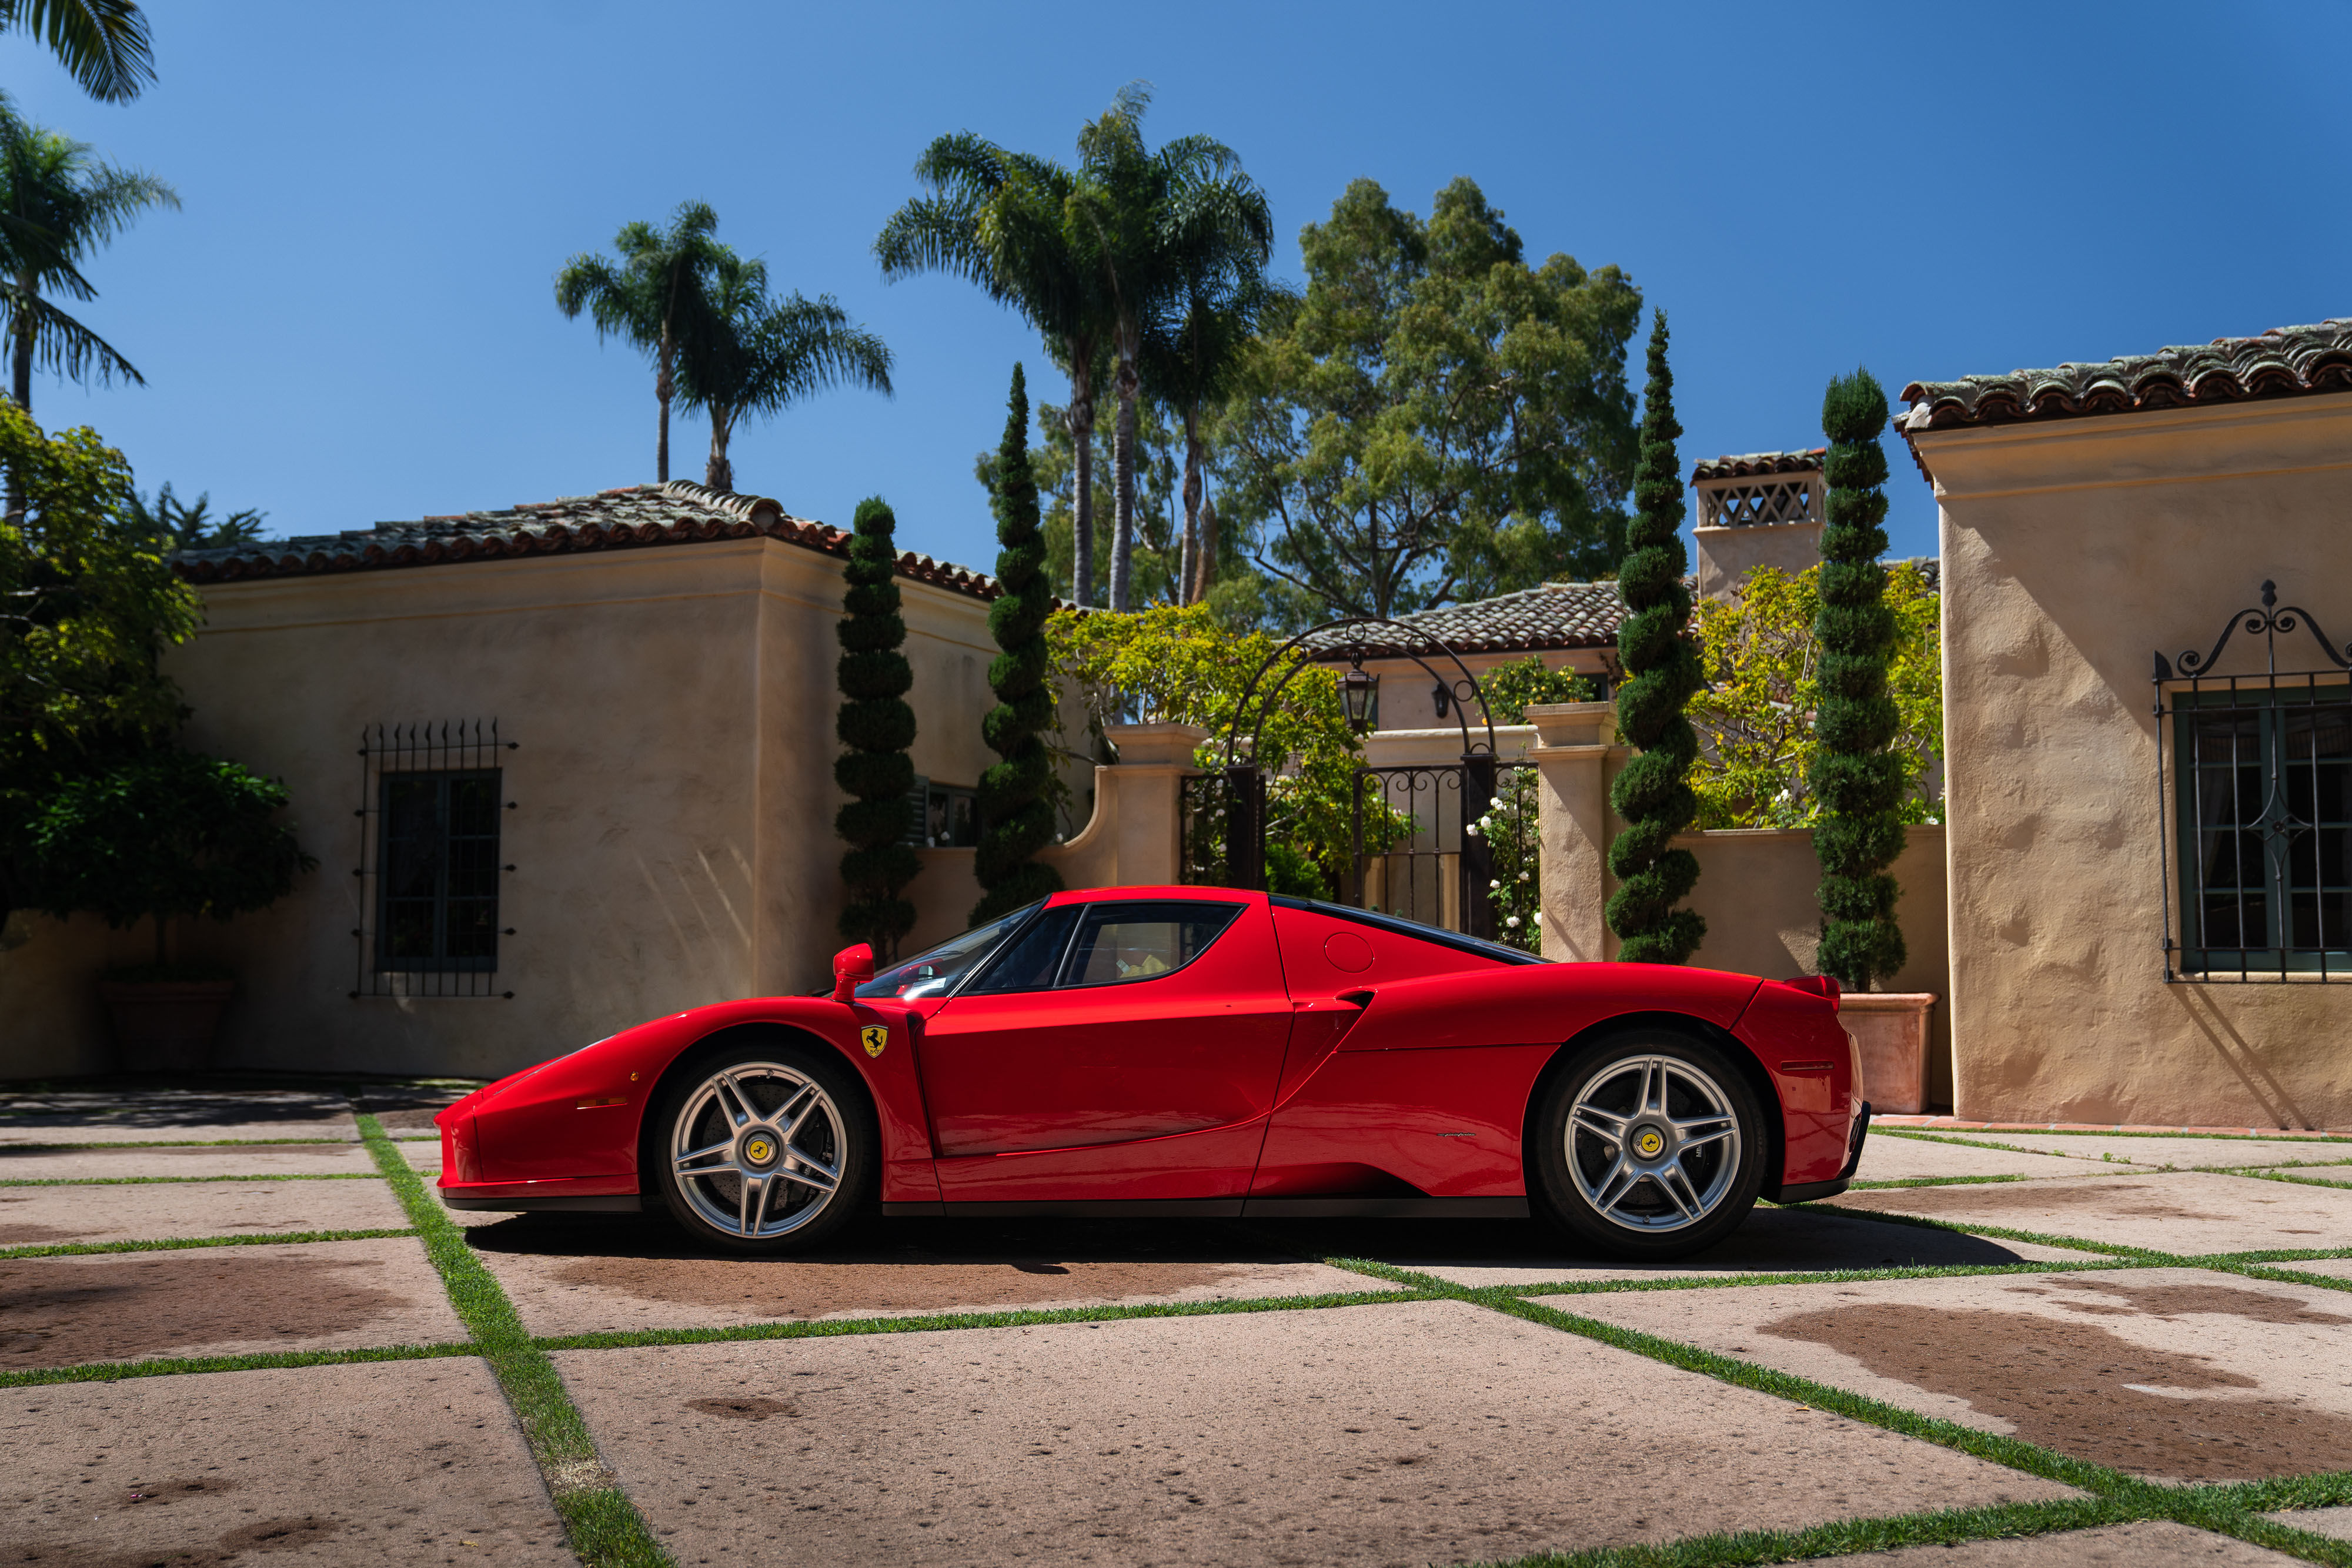 At 2 64 Million A Rare 03 Ferrari Enzo Breaks Record At Online Auction